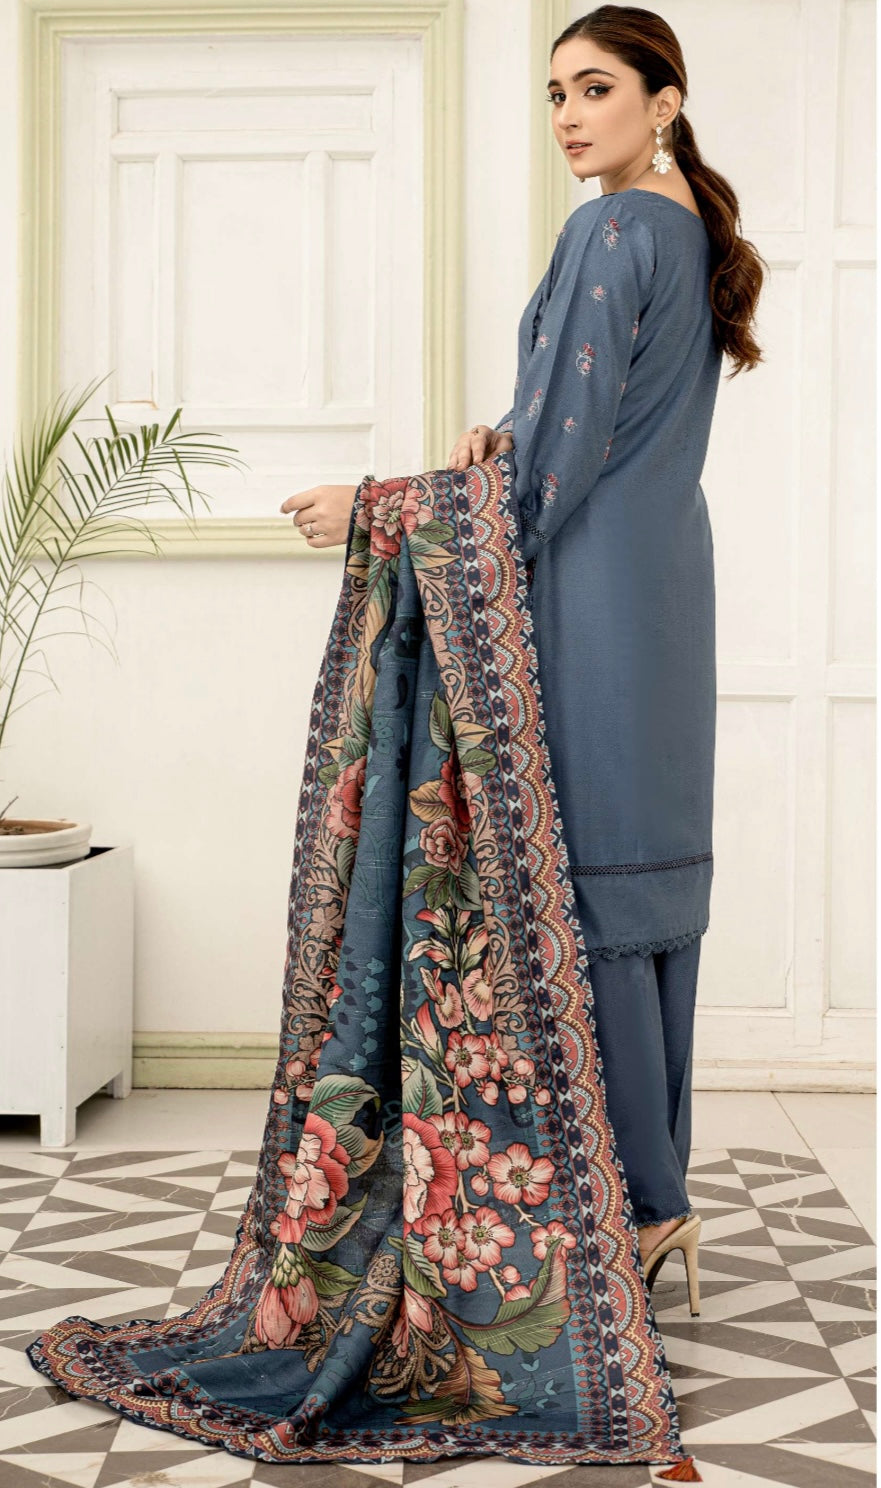 SIMRANS MAHI Dhanak Embroidered 3 Piece Winter Outfit With Shawl MSH06